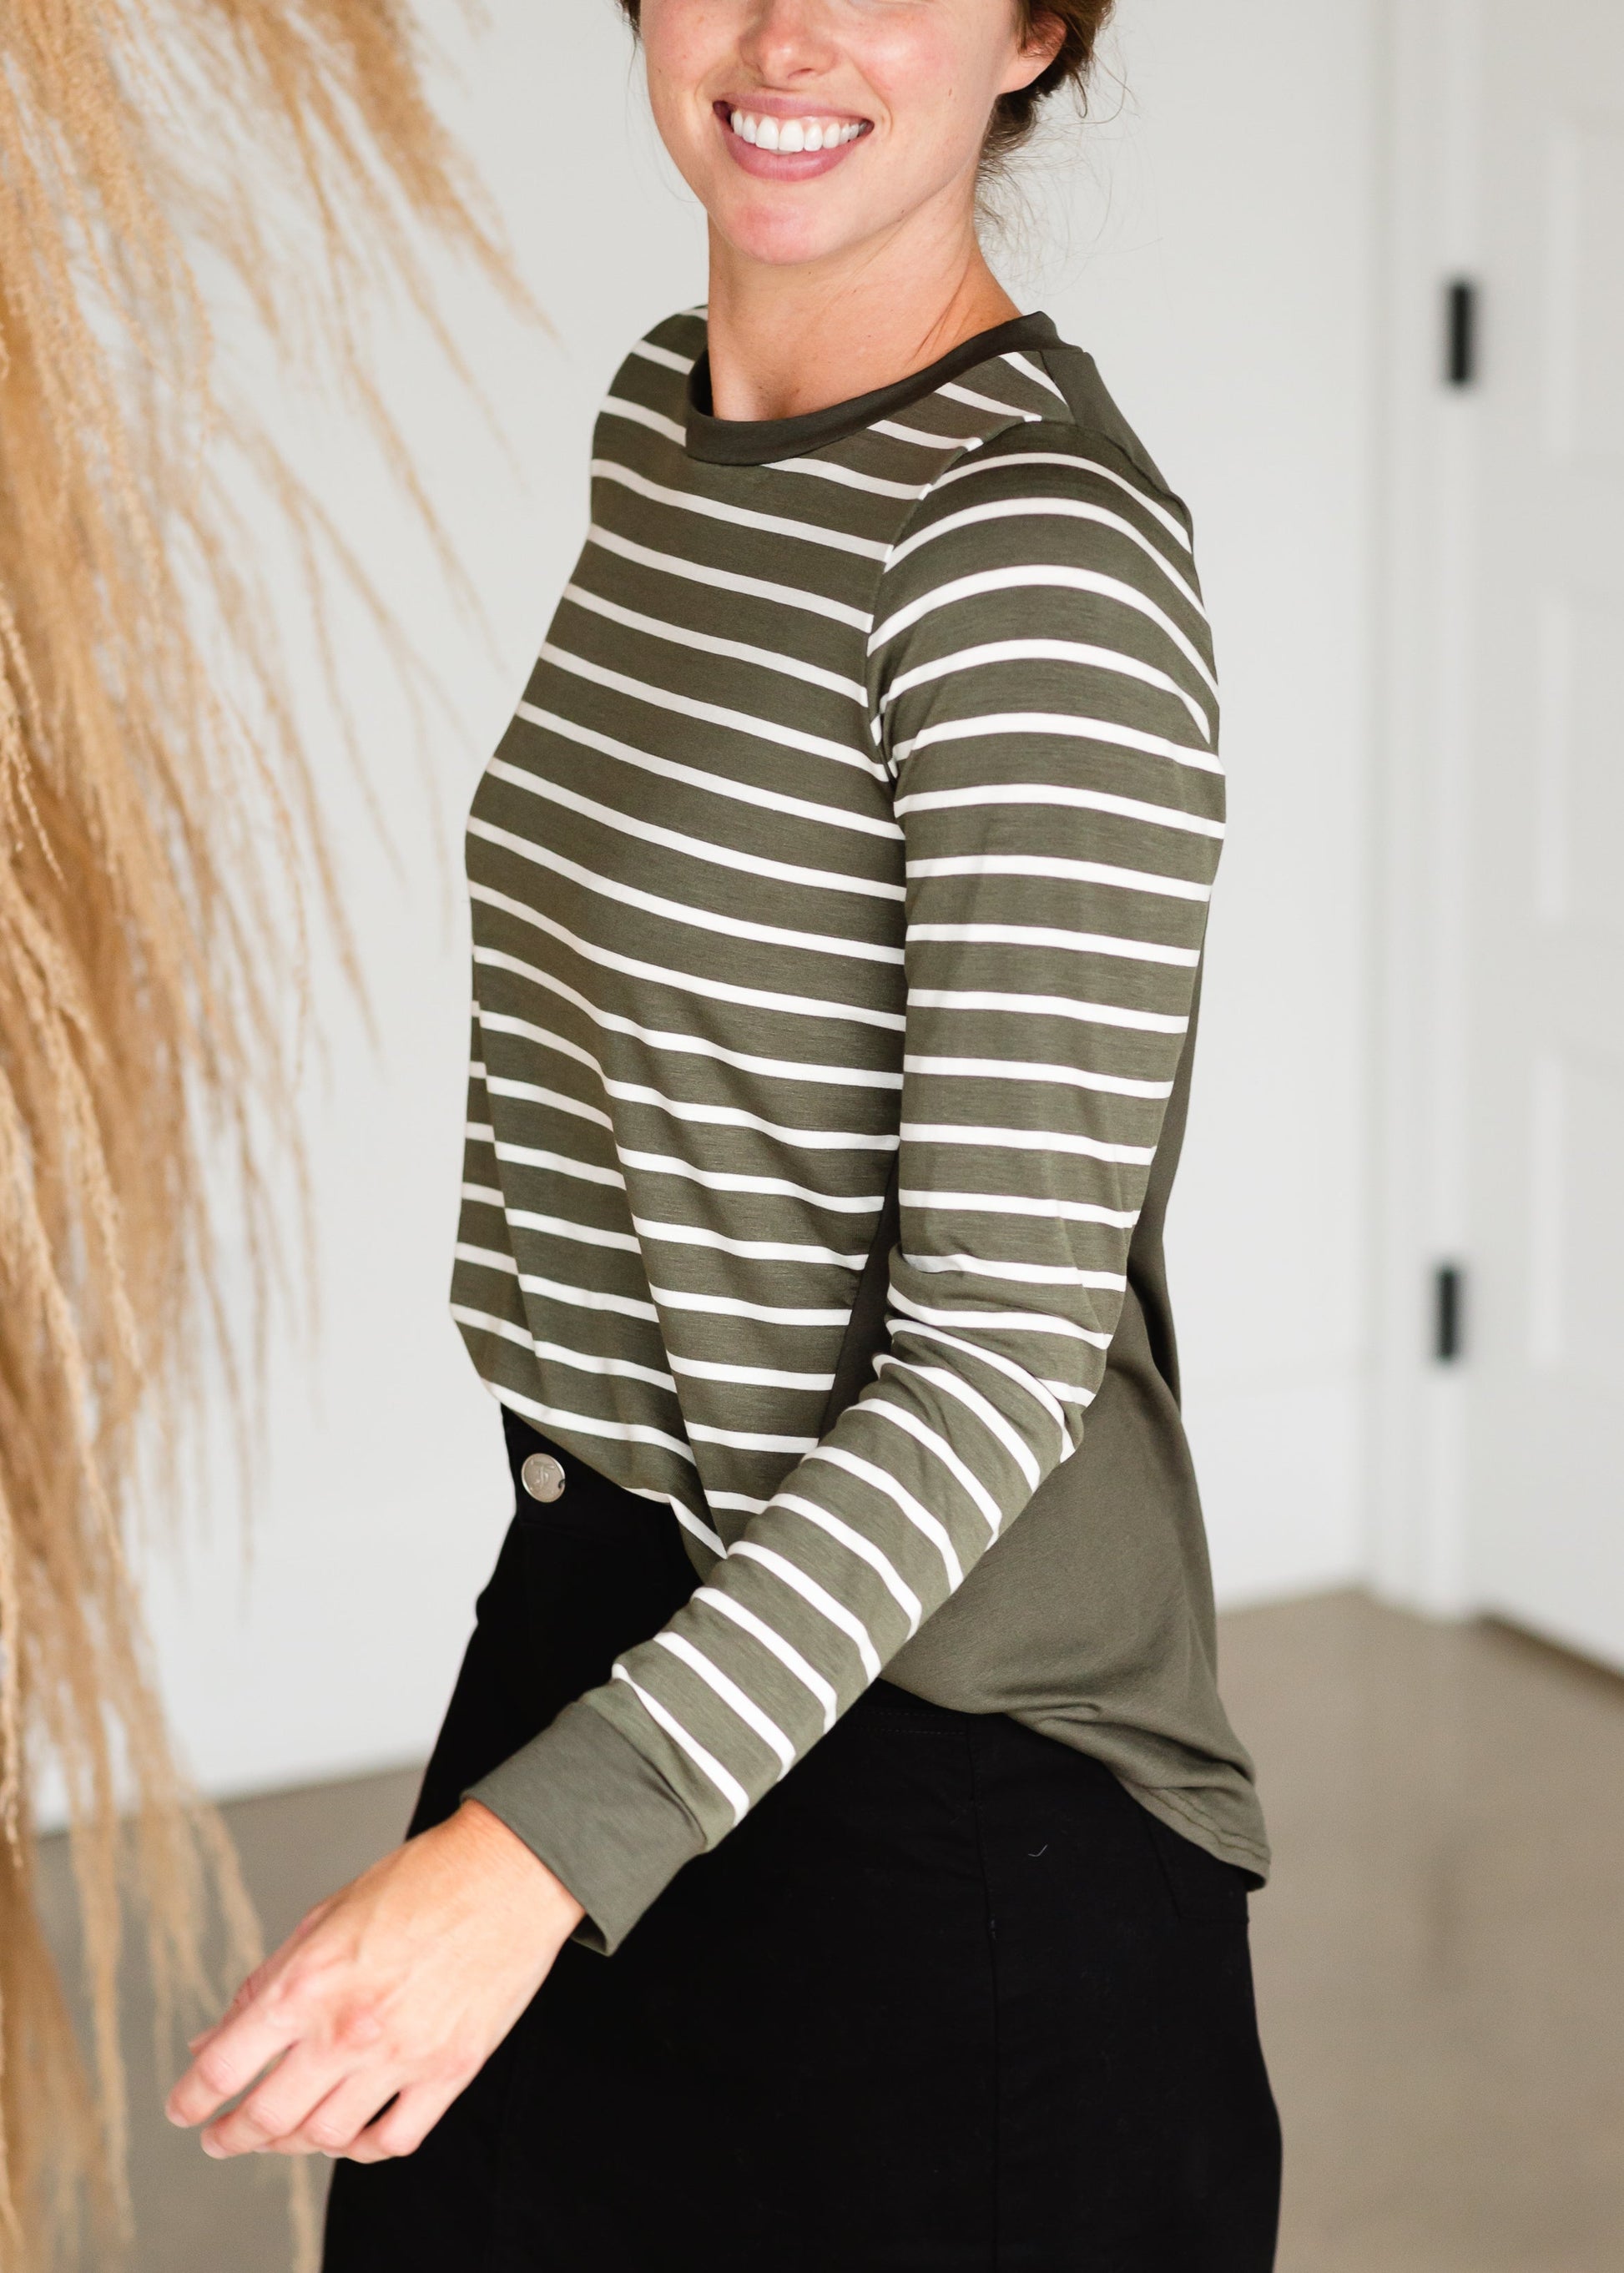 Olive High Lo Striped Long Sleeve Tee - FINAL SALE Tops